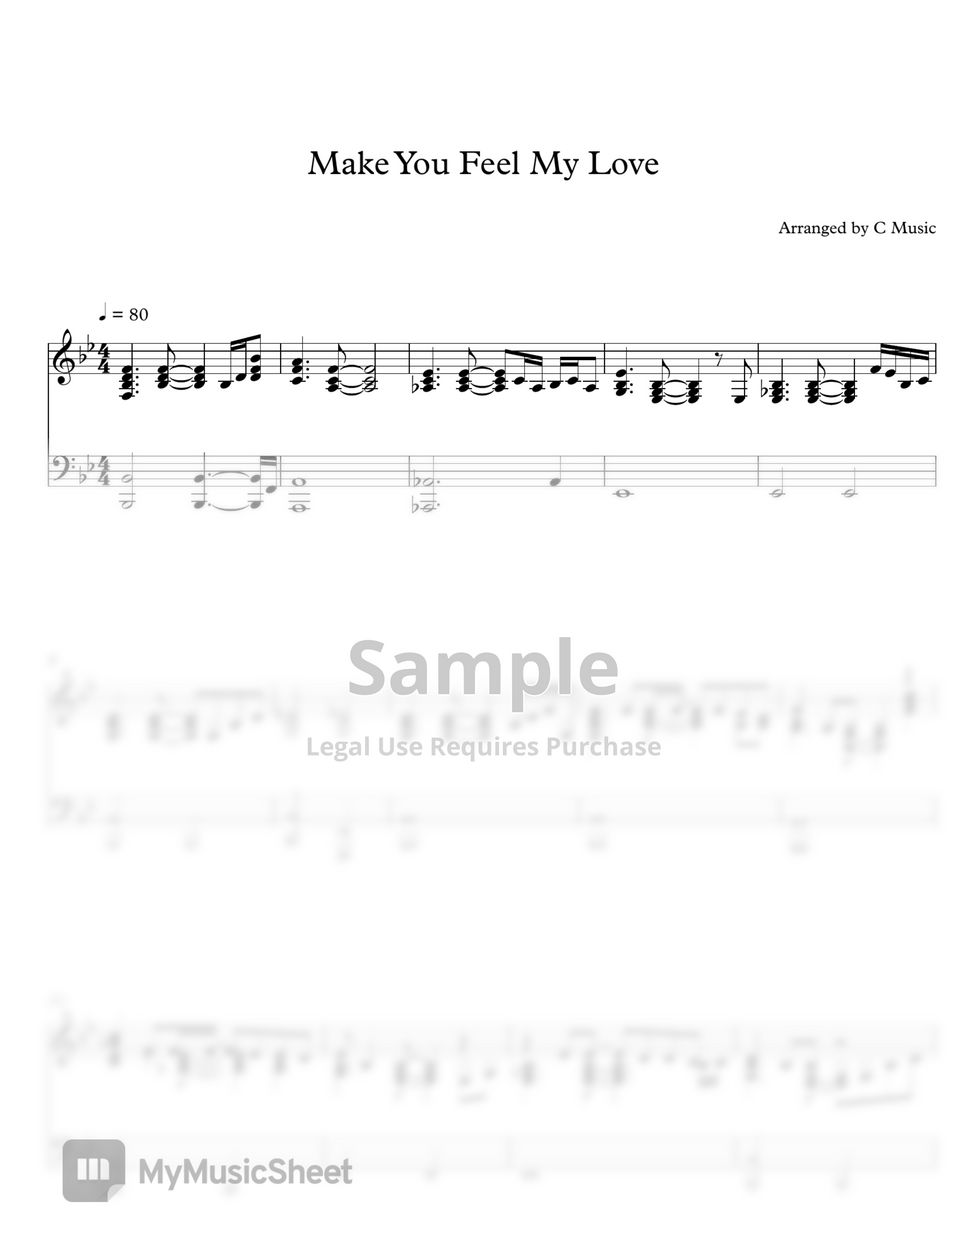 Adele - To Make You Feel My Love by C Music